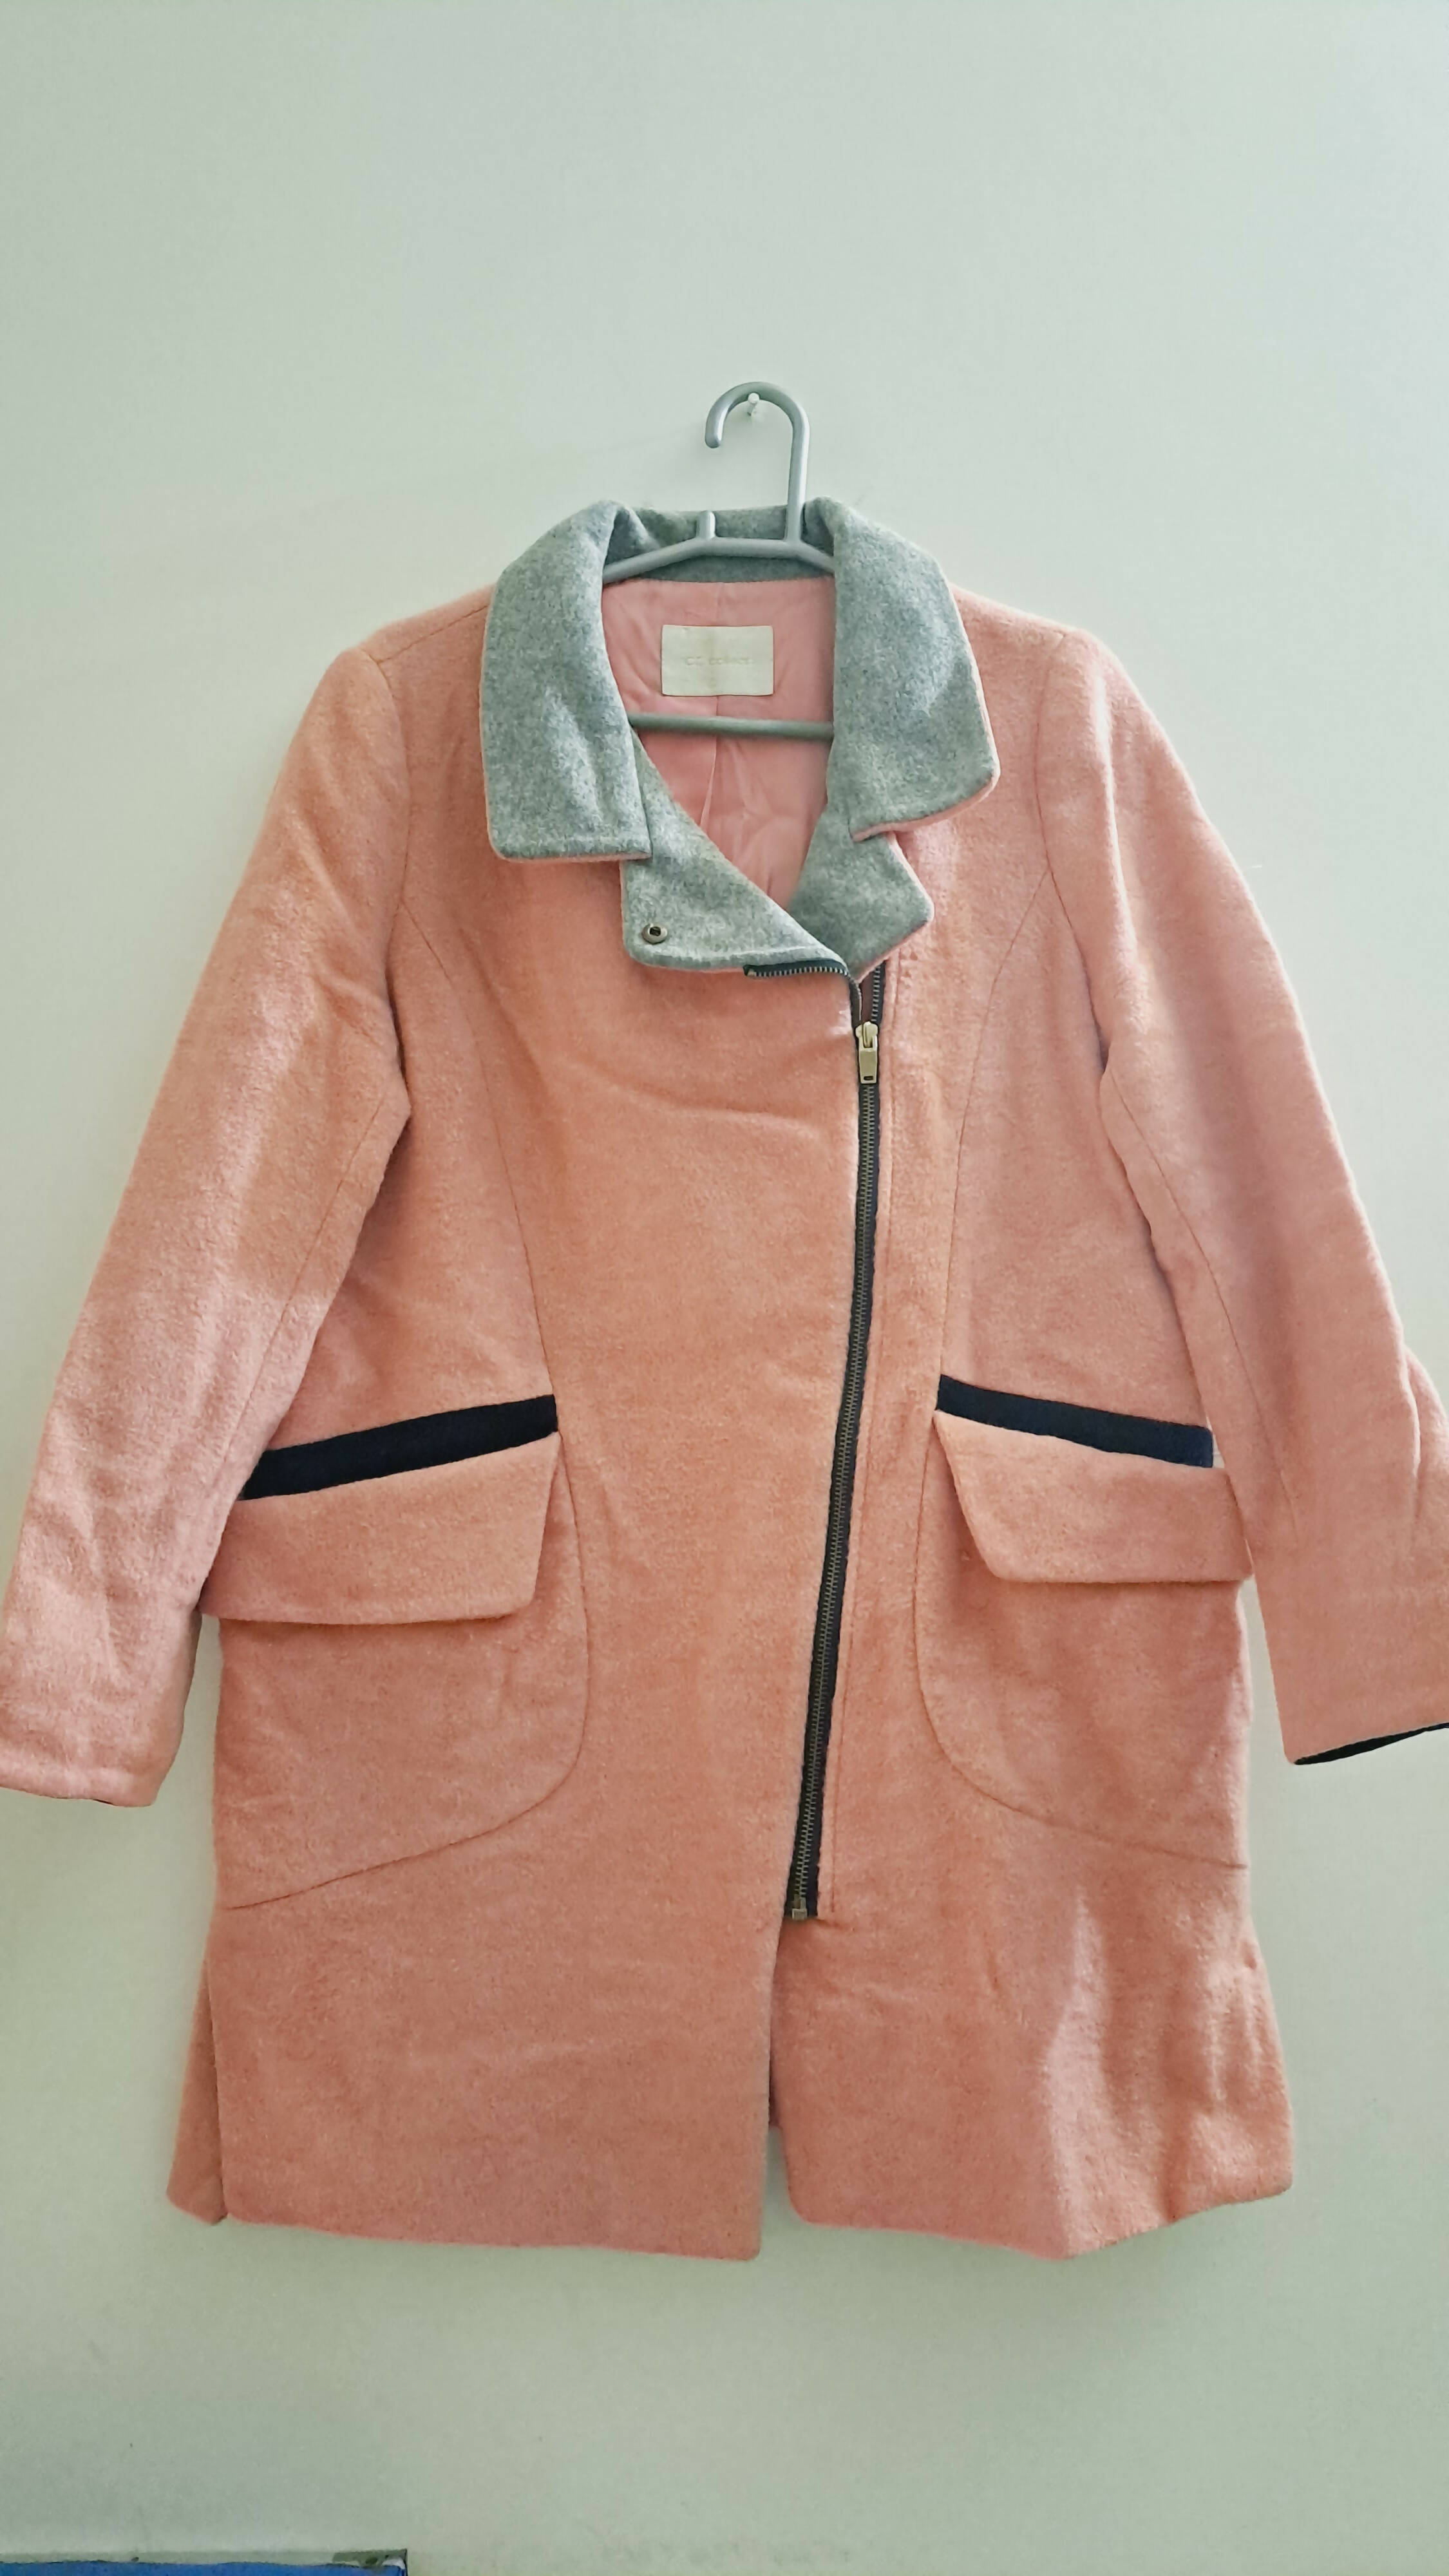 CC Collect | Women's lapel collar coat | Women Sweaters & Jackets | Worn Once